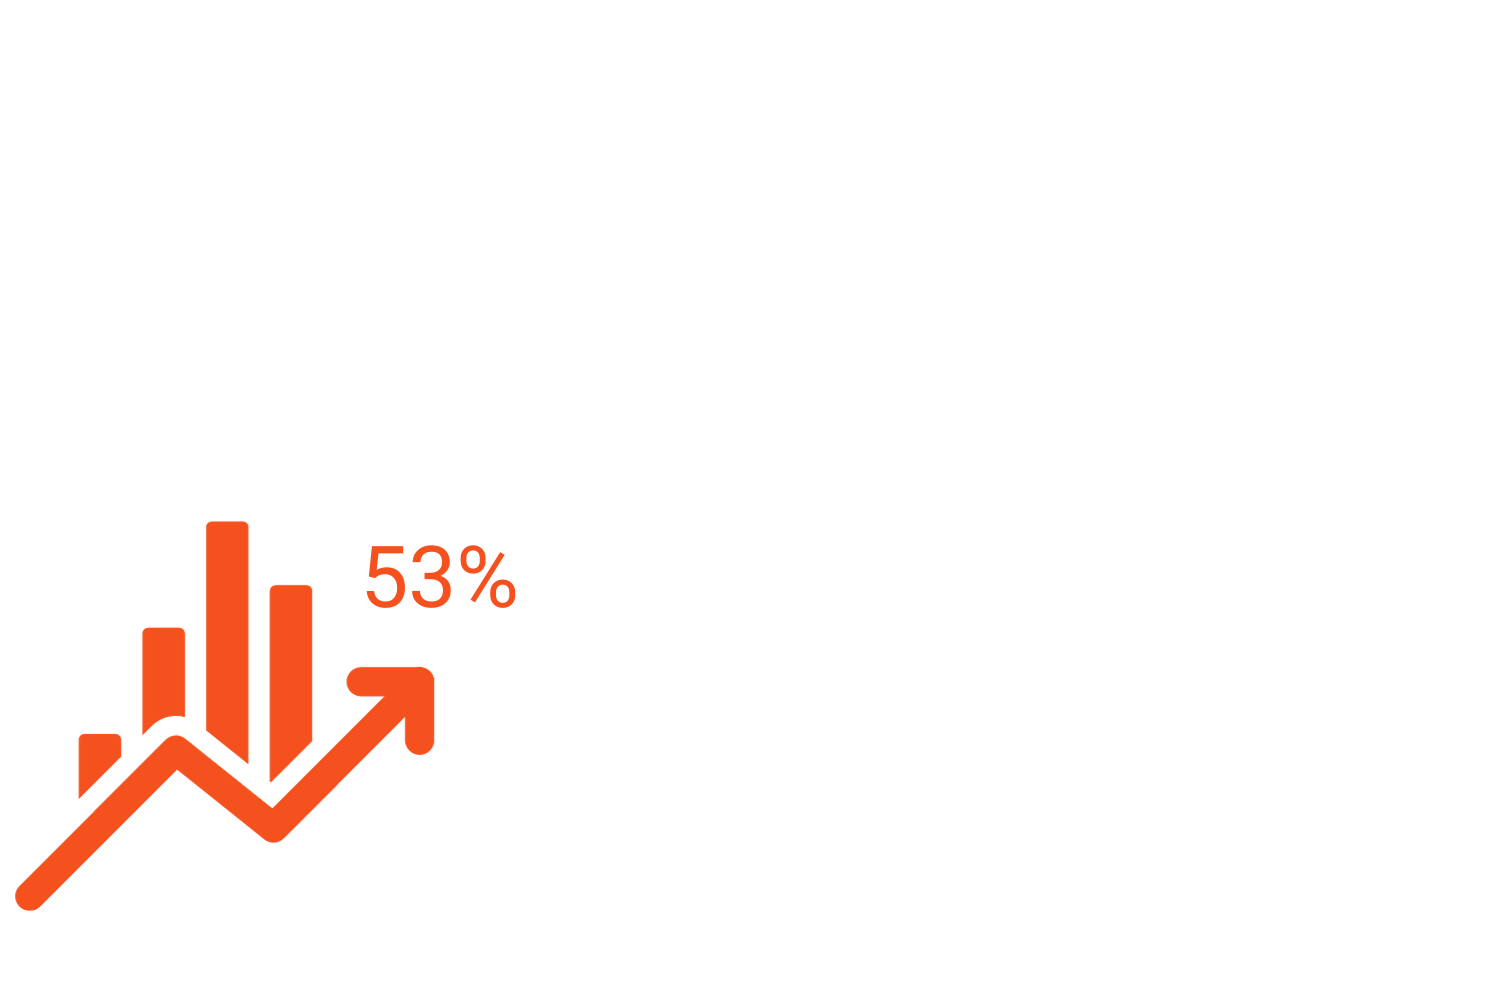 We’ve supported customers in making the move to Activity Based Rostering. This is an increase of 53% throughout 2023!